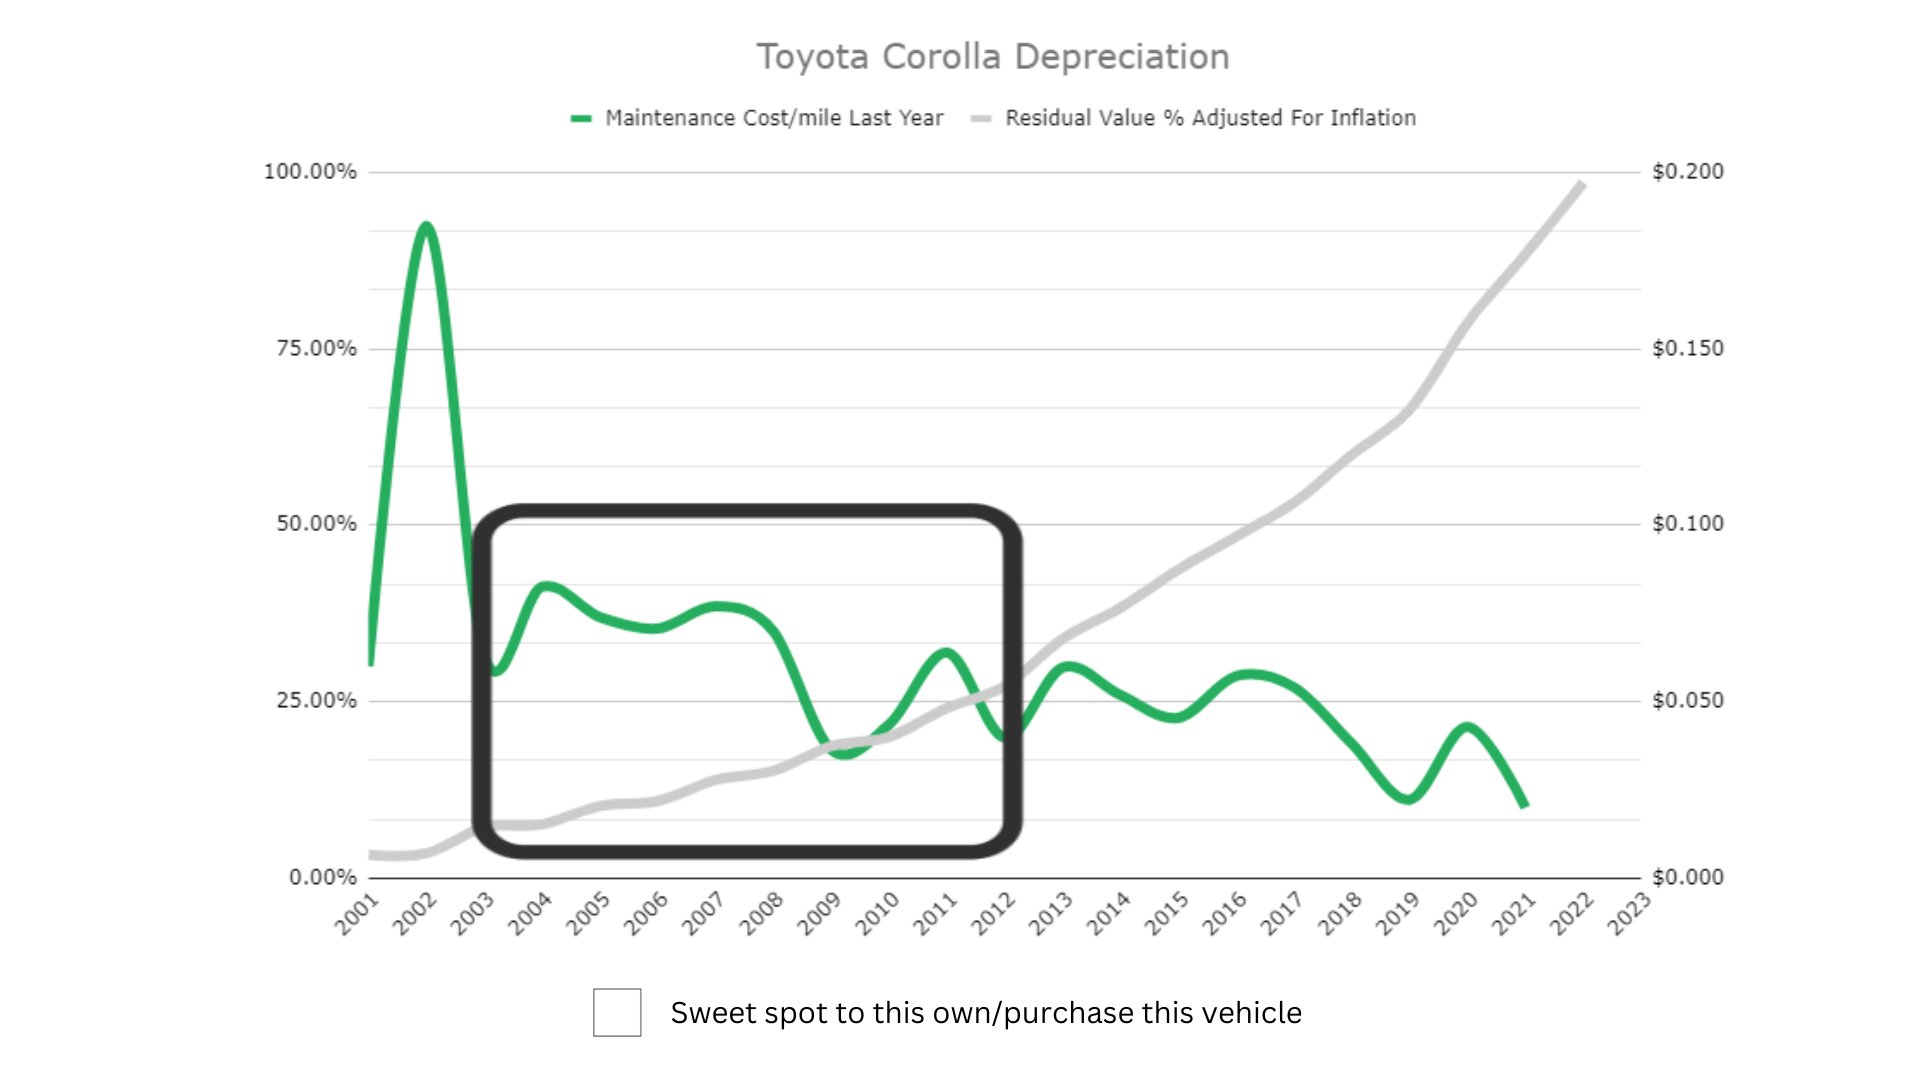 A chart showing the depreciation of the Toyota Corolla. It shows the best time to own/purchase a Toyota Corolla